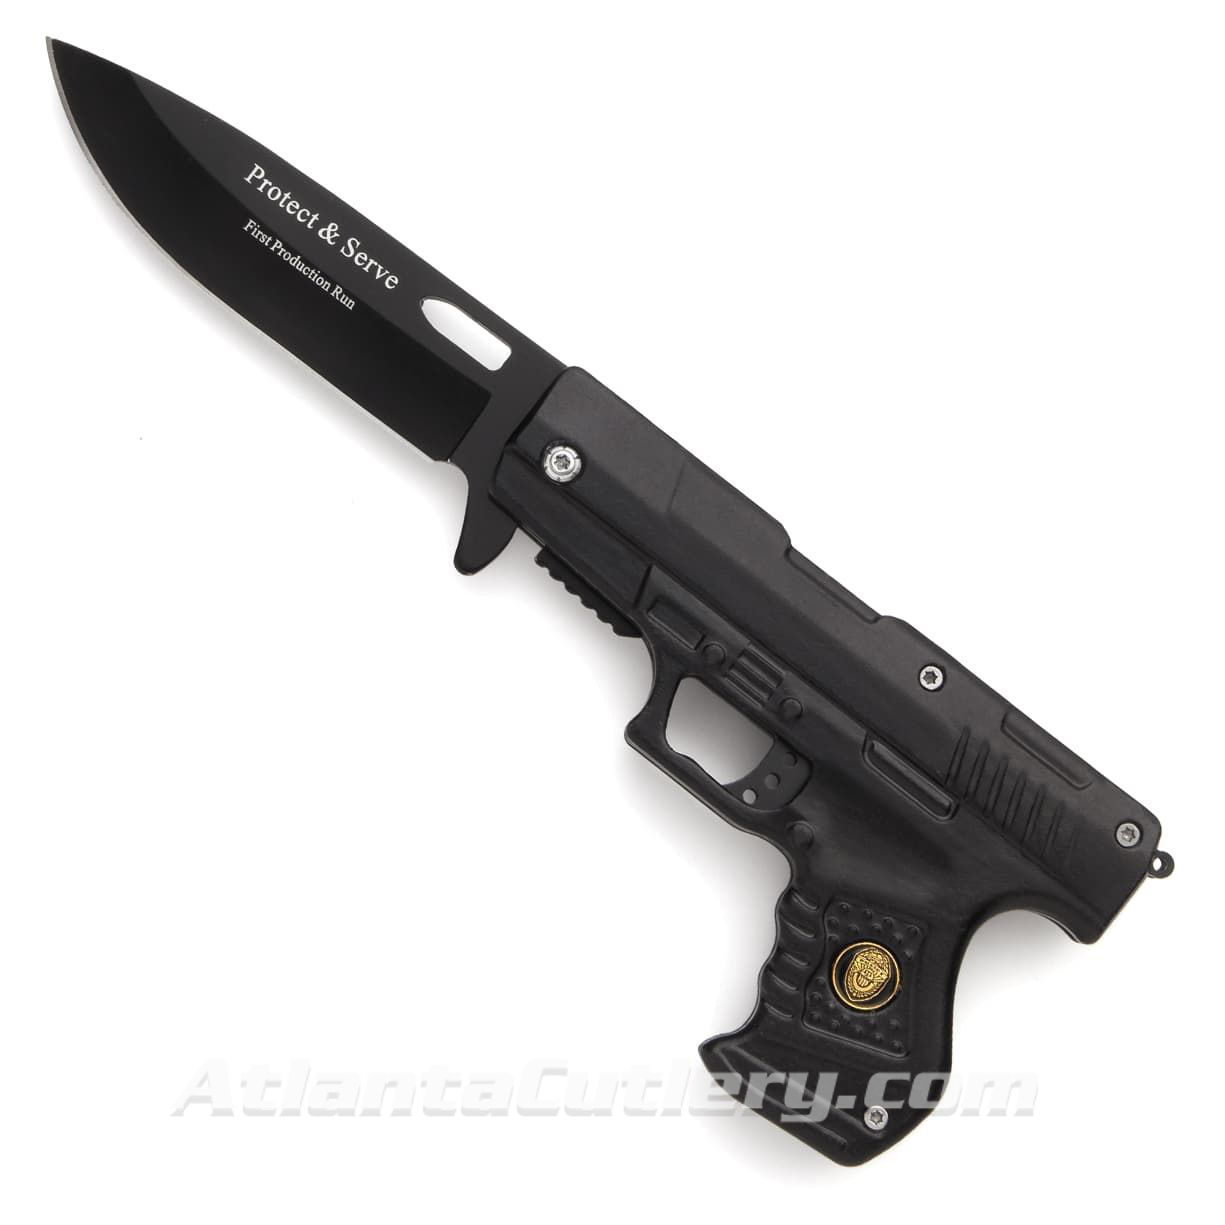 Police Pistol folding knife has cast steel handle, police force insignia inlay in grip and black stainless steel blade